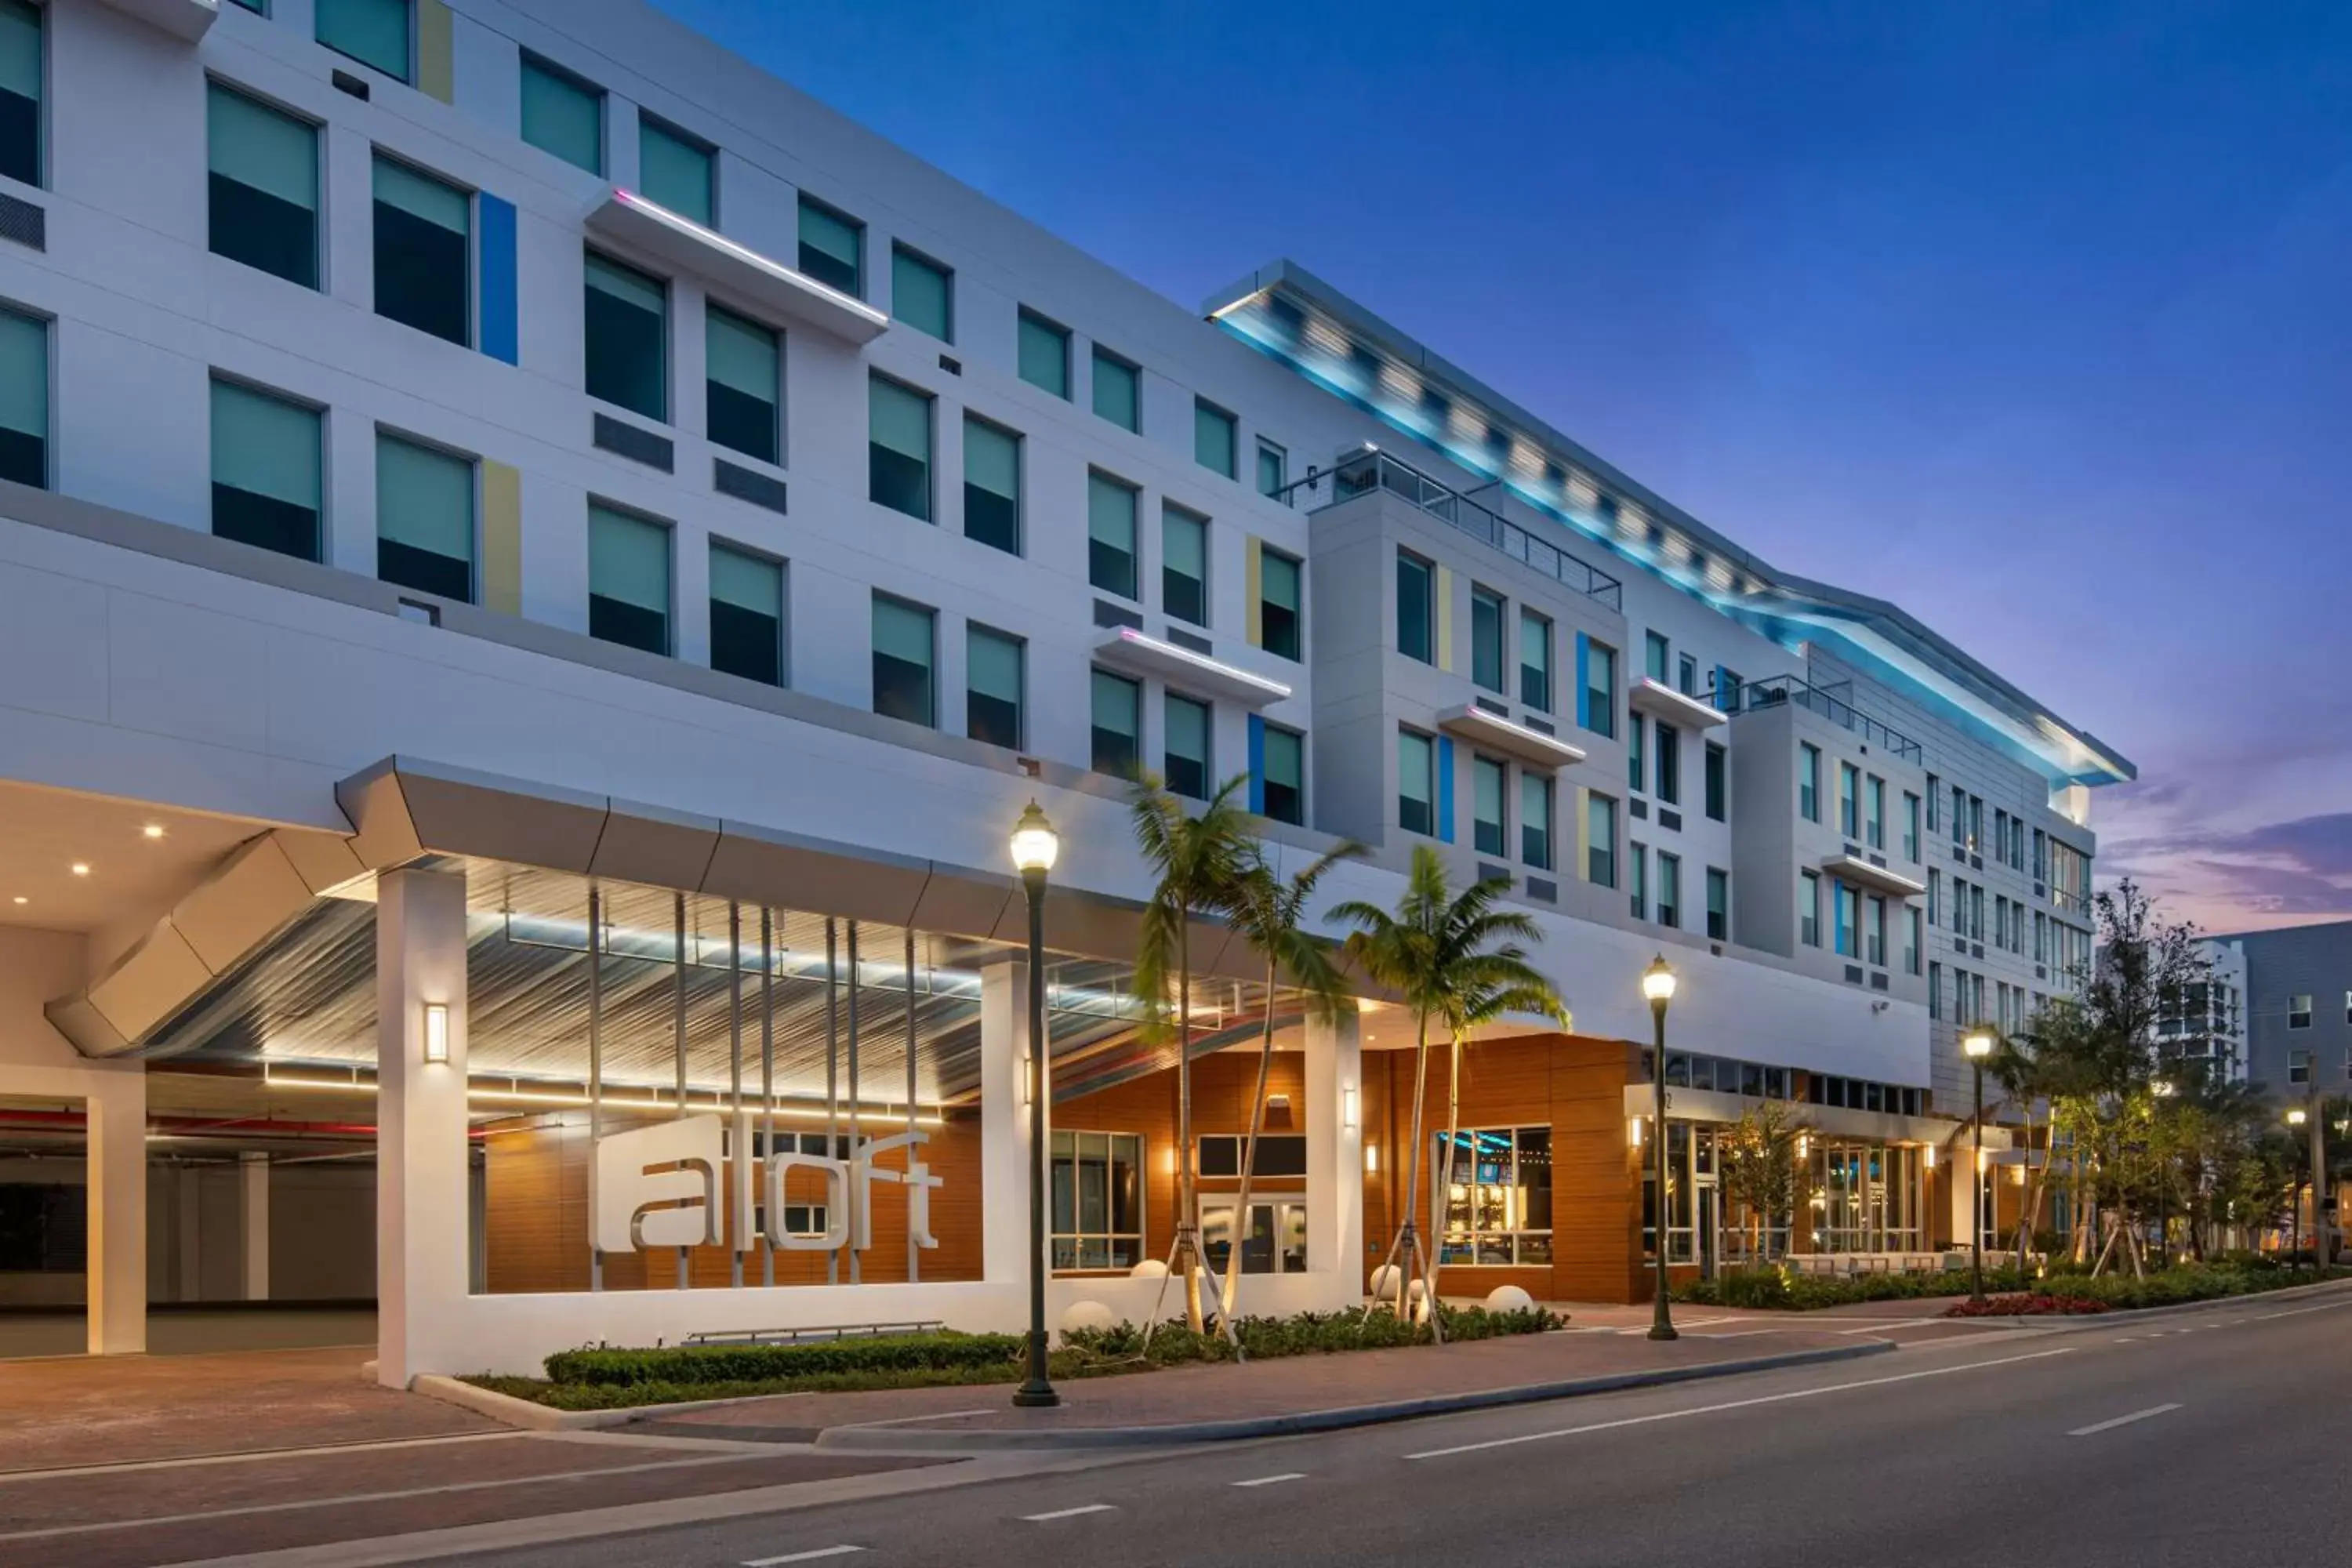 Other, Property Building in Aloft Delray Beach